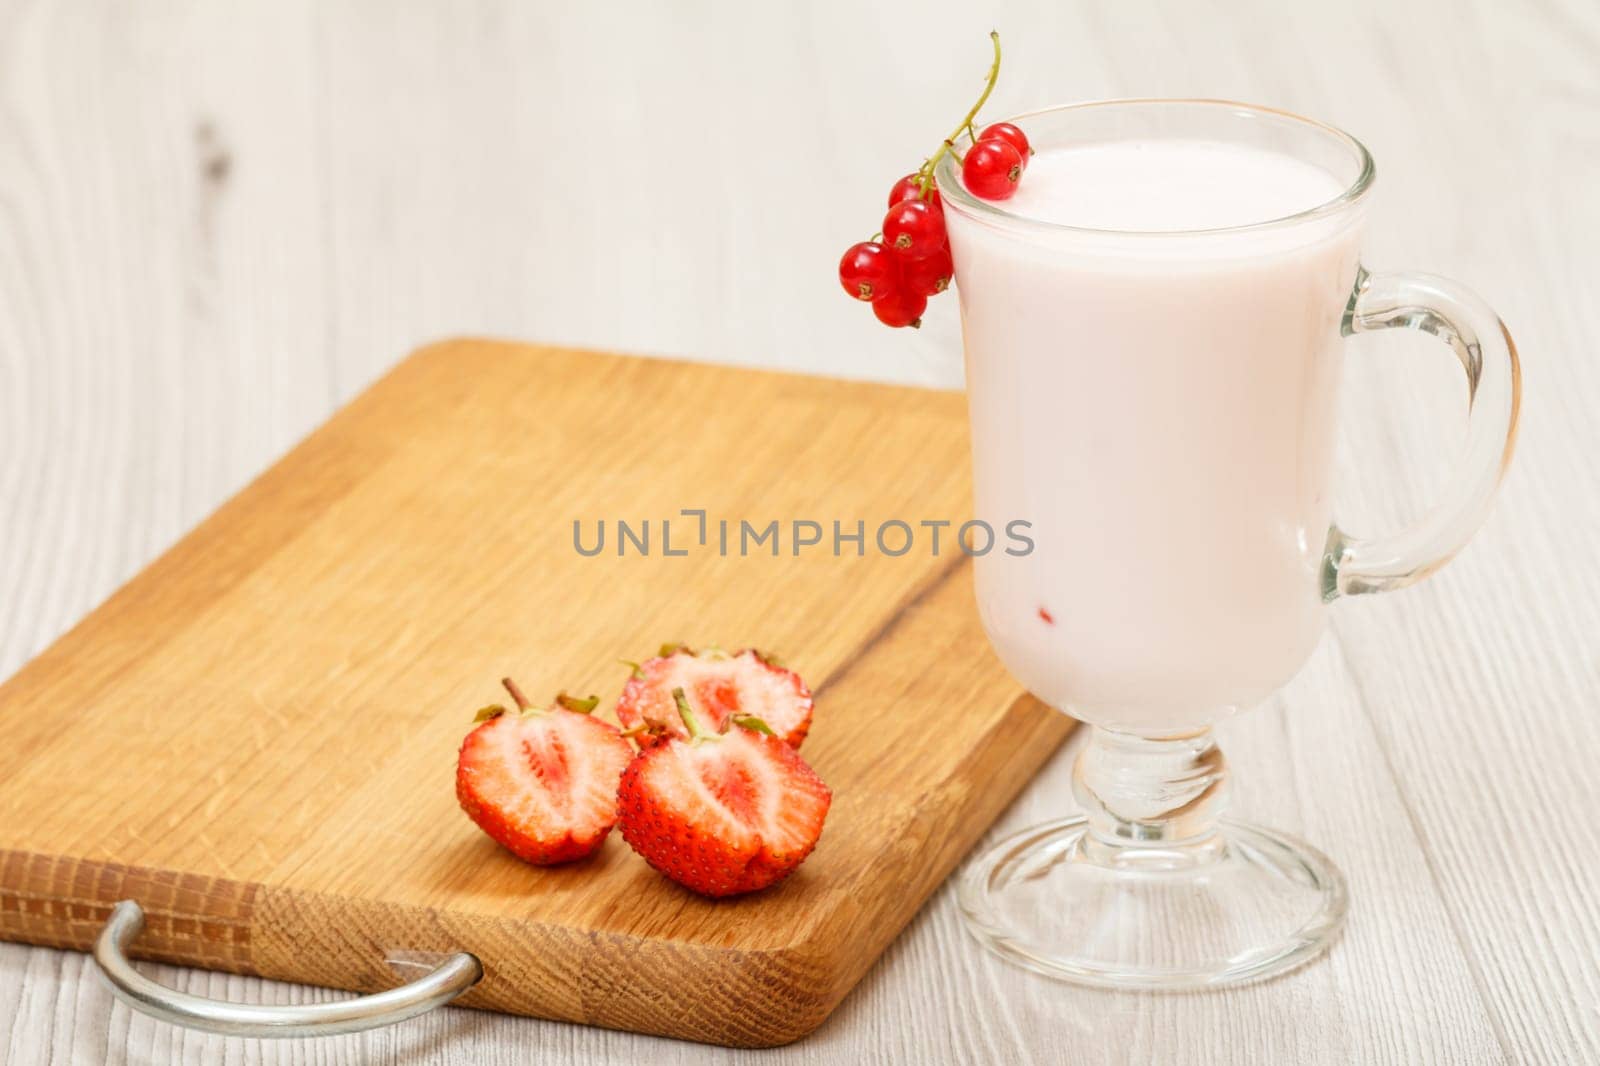 Glass of delicious strawberry yogurt with mint leaves and fresh strawberries on wooden cutting board.